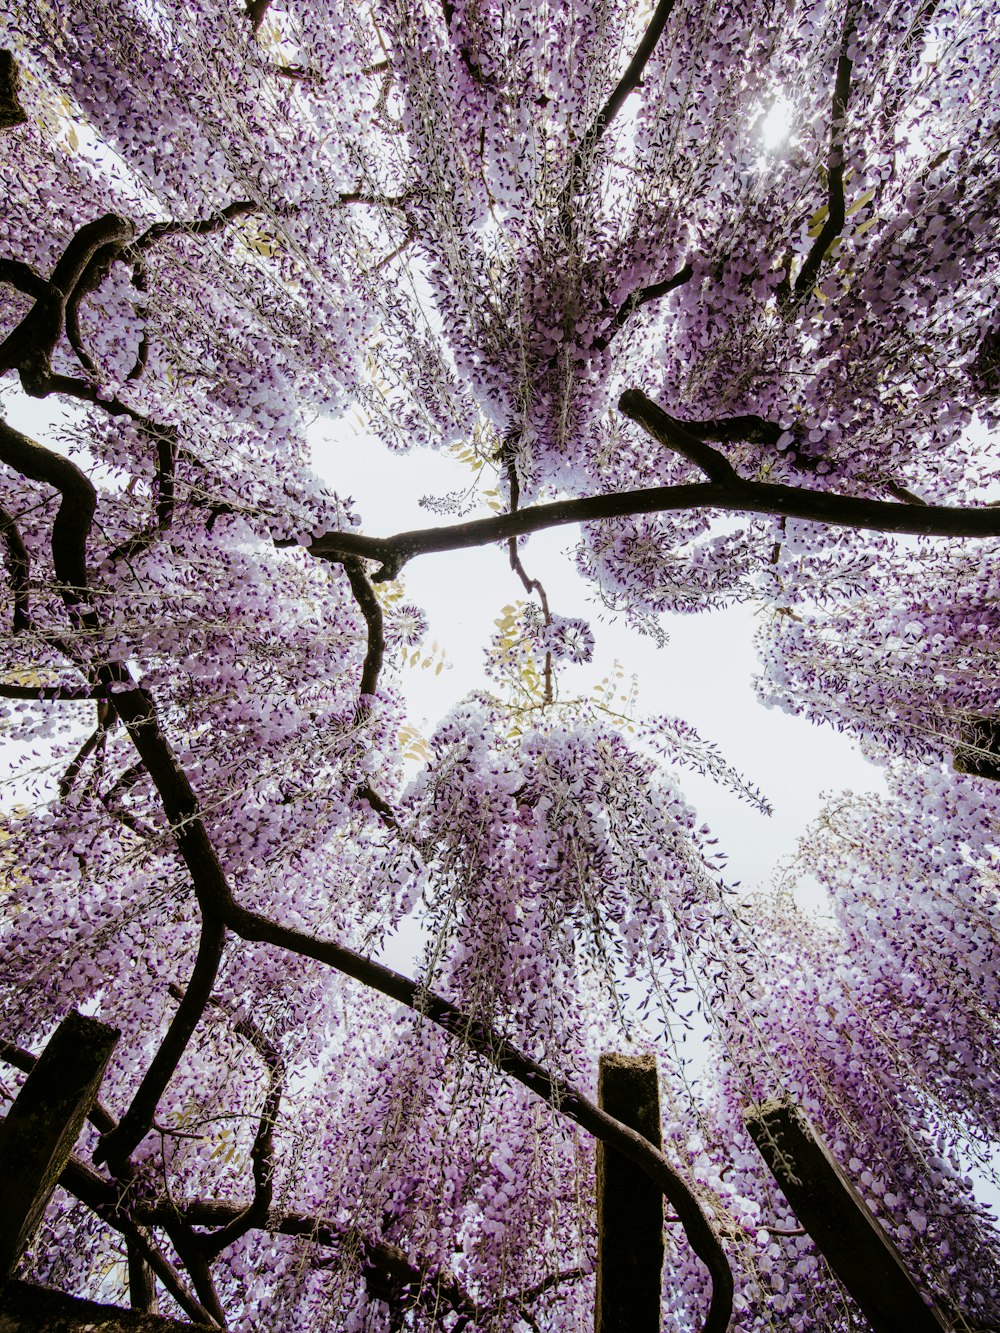 looking up at the canopy of a purple flowering tree